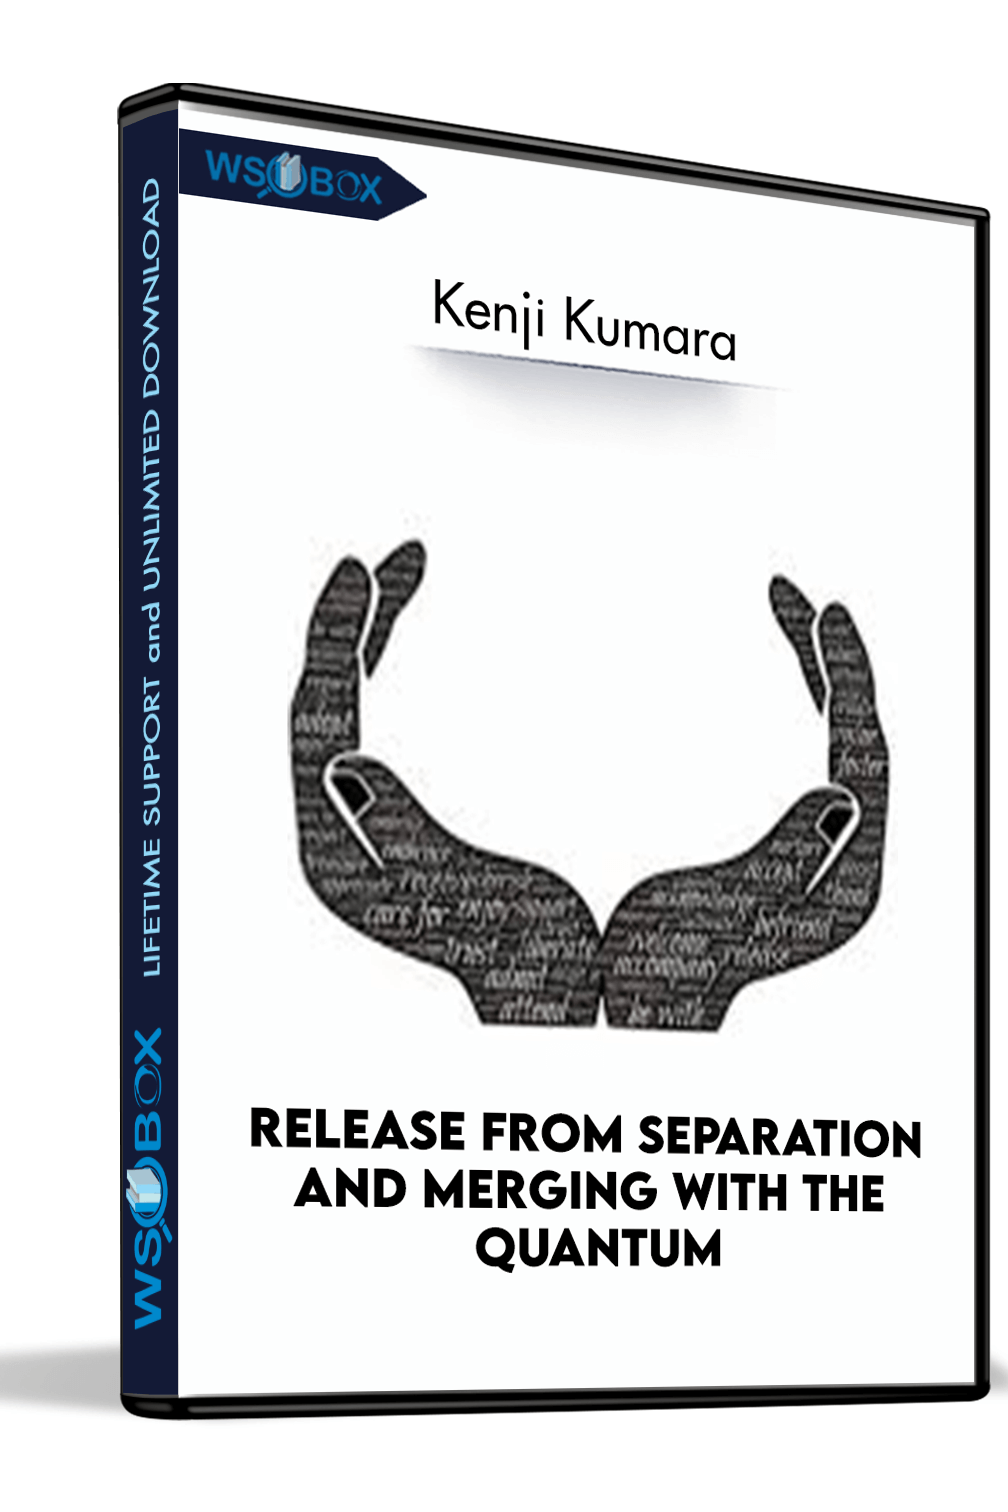 Release From Separation and Merging With The Quantum – Kenji Kumara